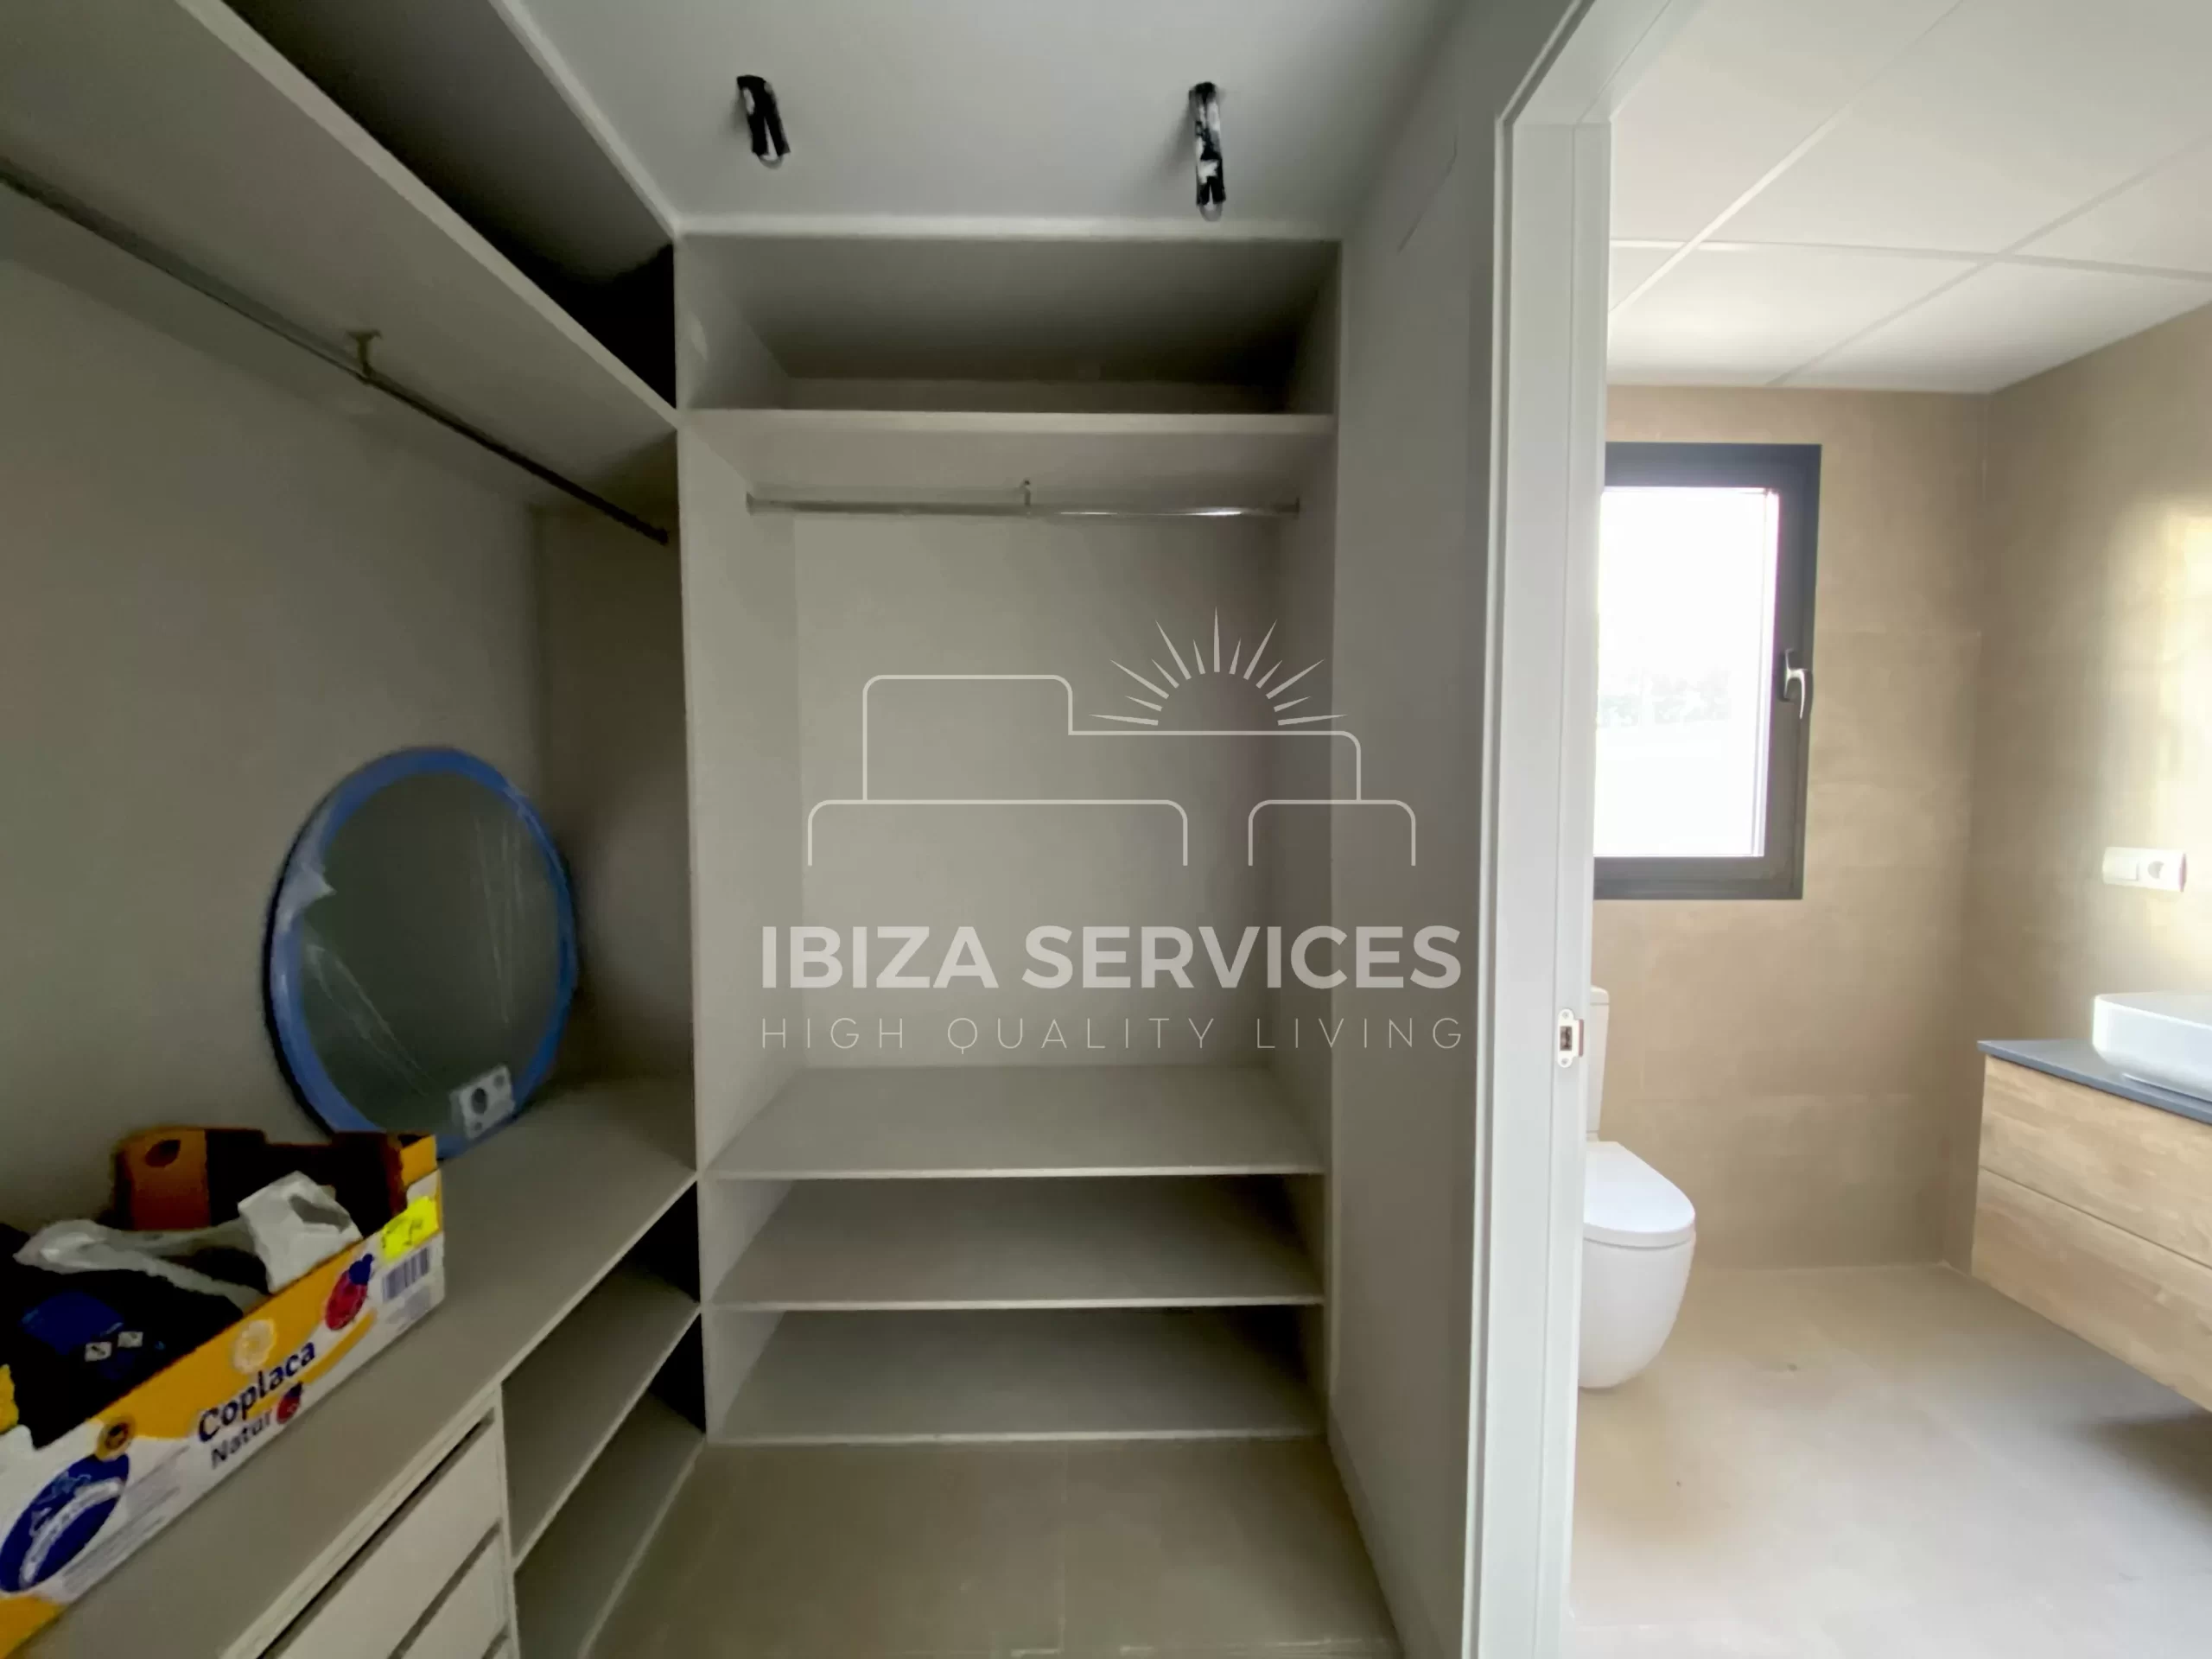 Modern Detached House For Sale in the Heart of San Josep Village.